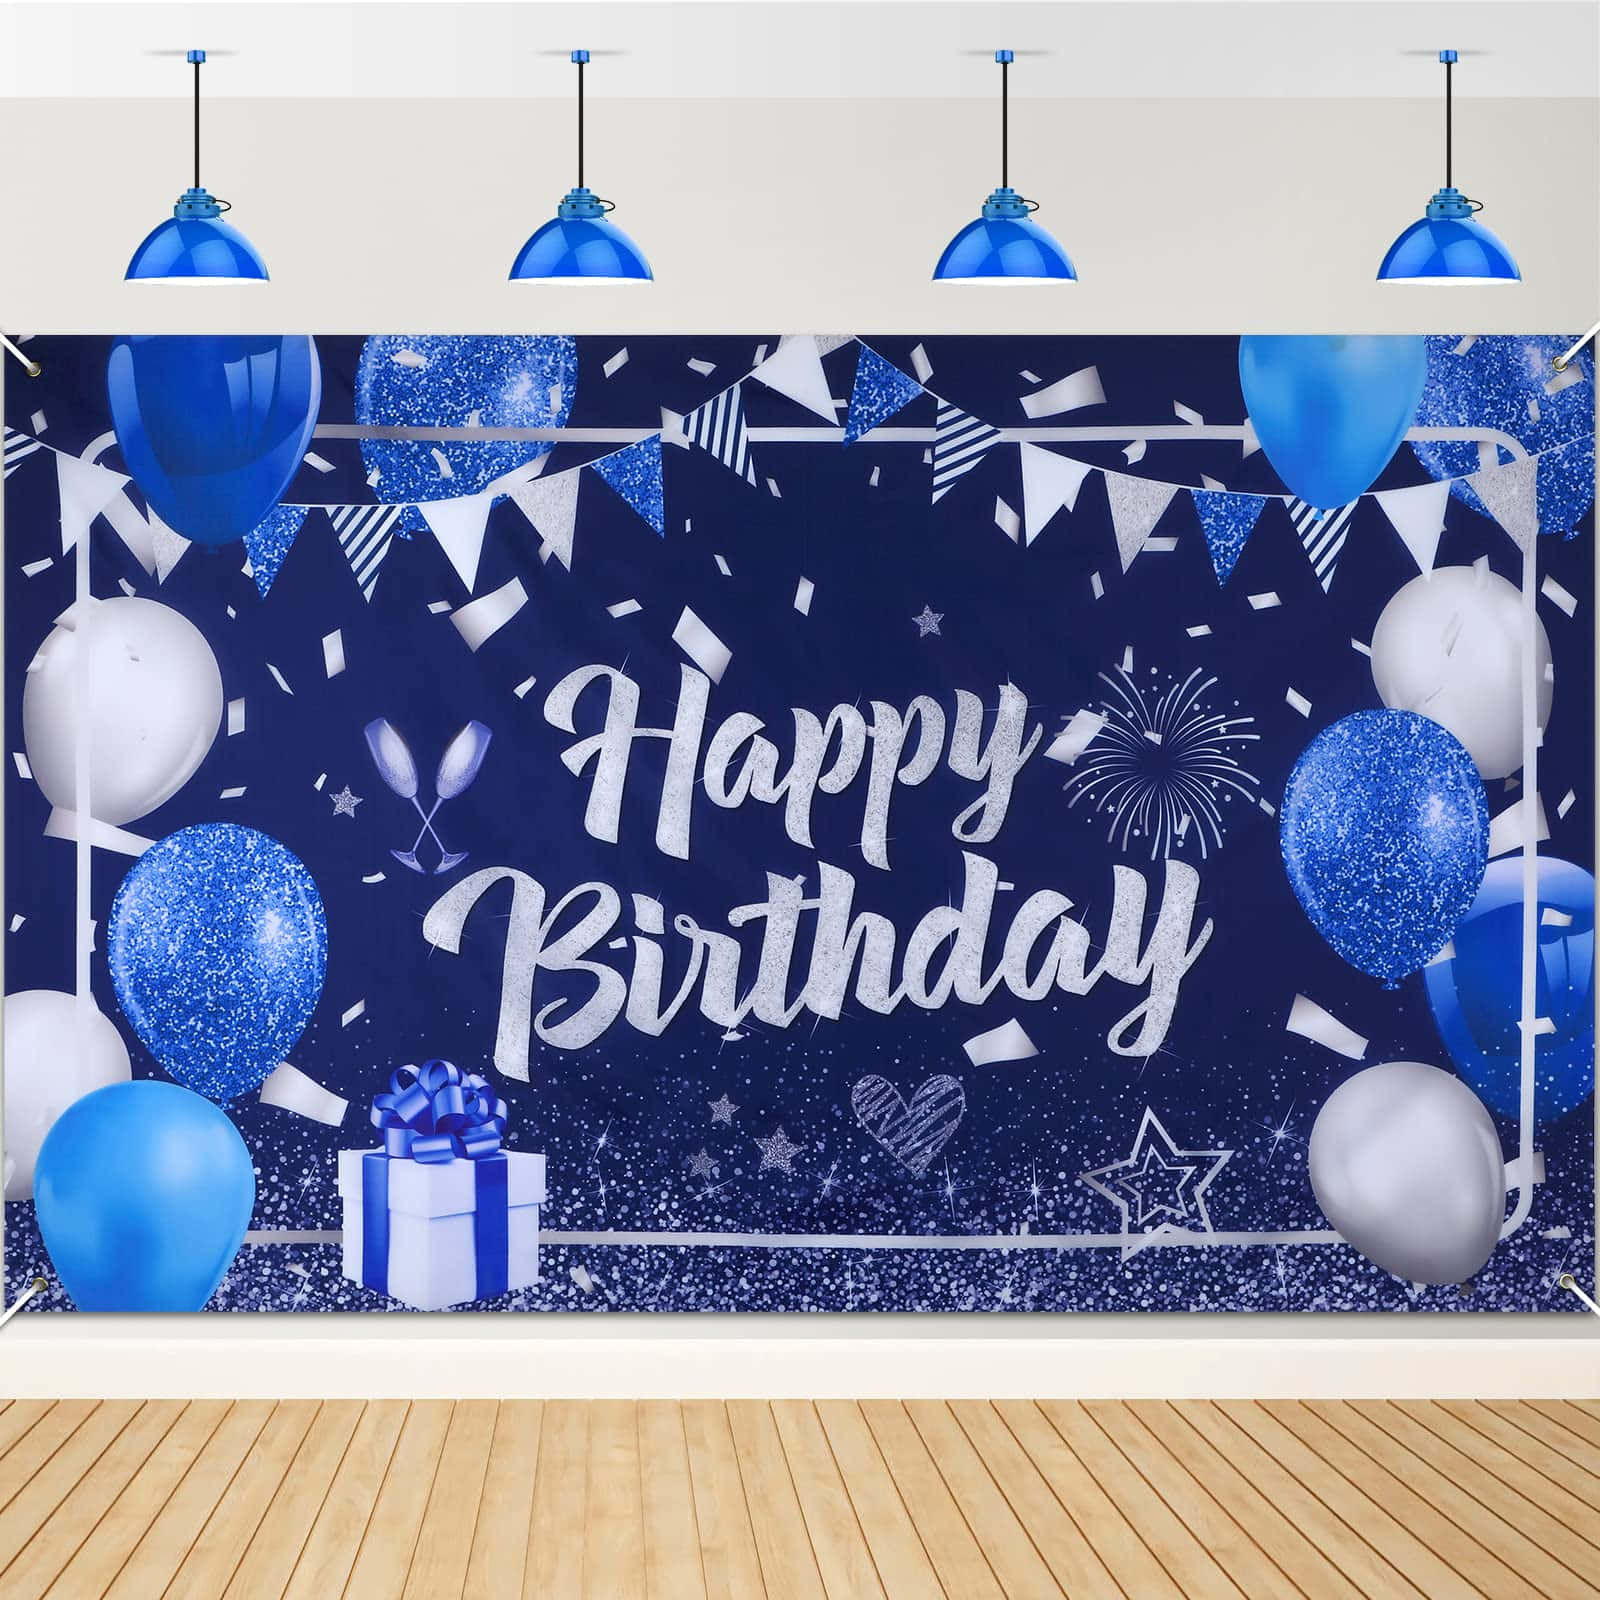 Download Blue Birthday Background 1600 X 1600 | Wallpapers.com